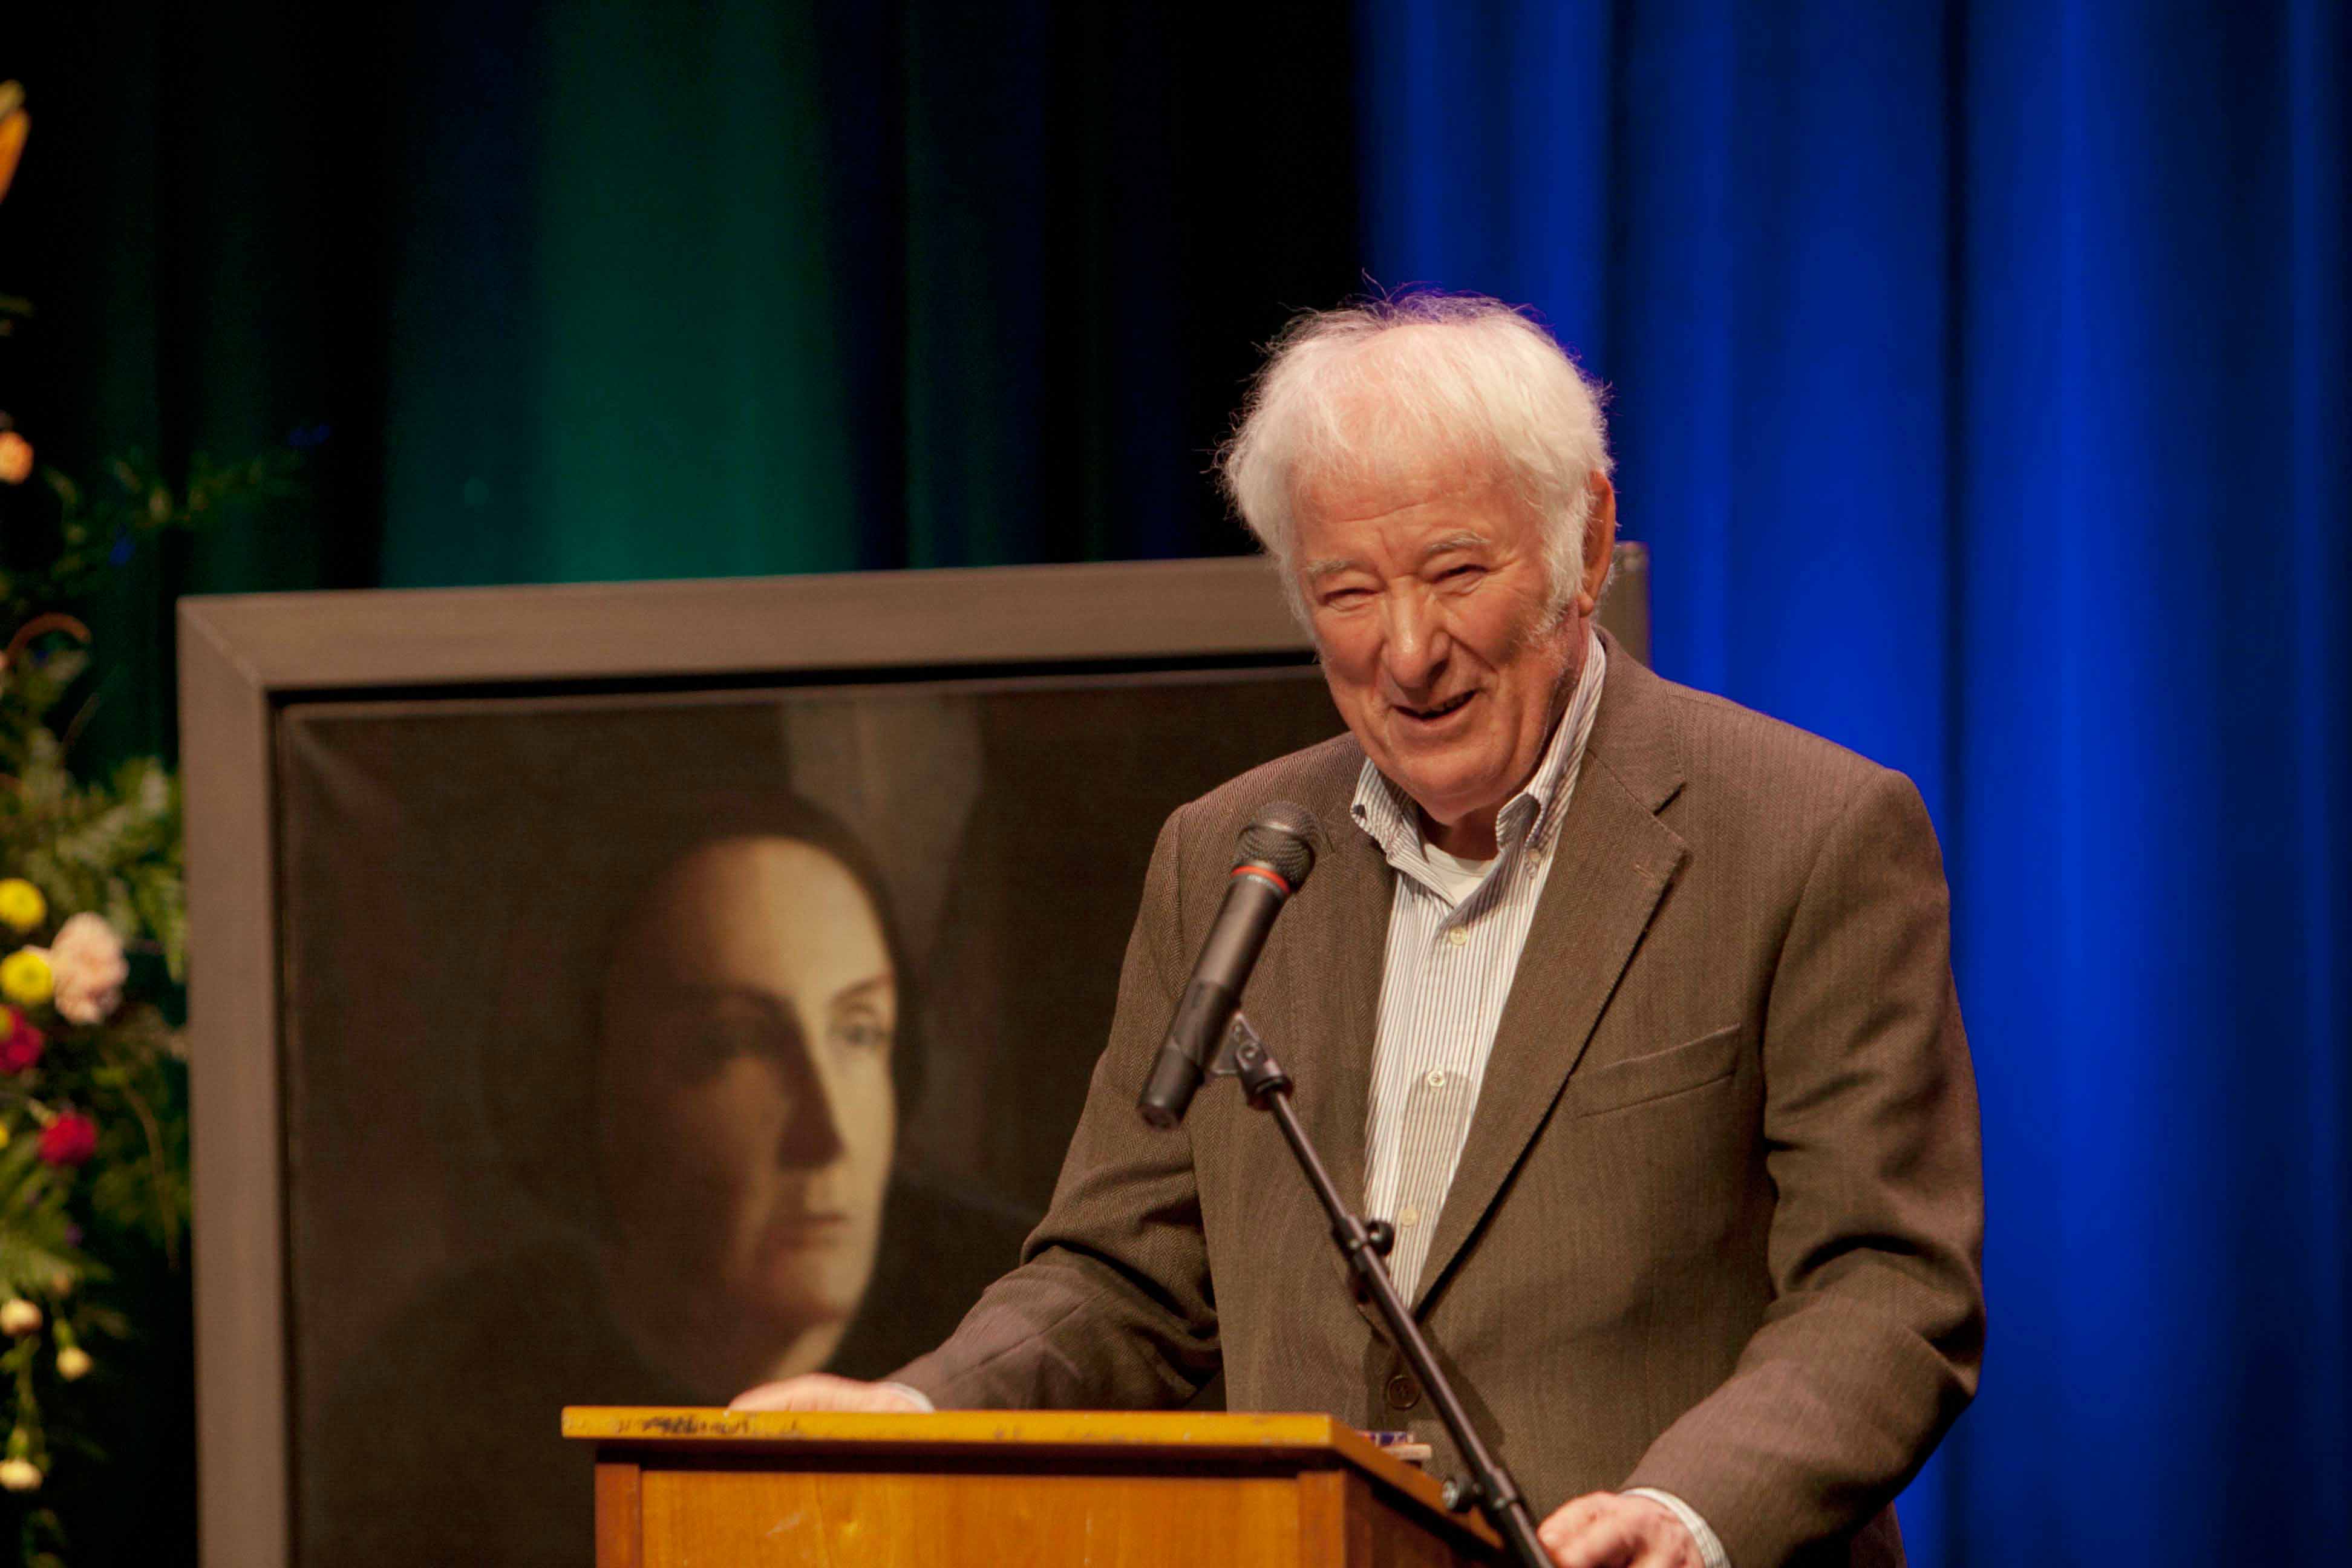 Free public lecture on Seamus Heaney to be held at MIC